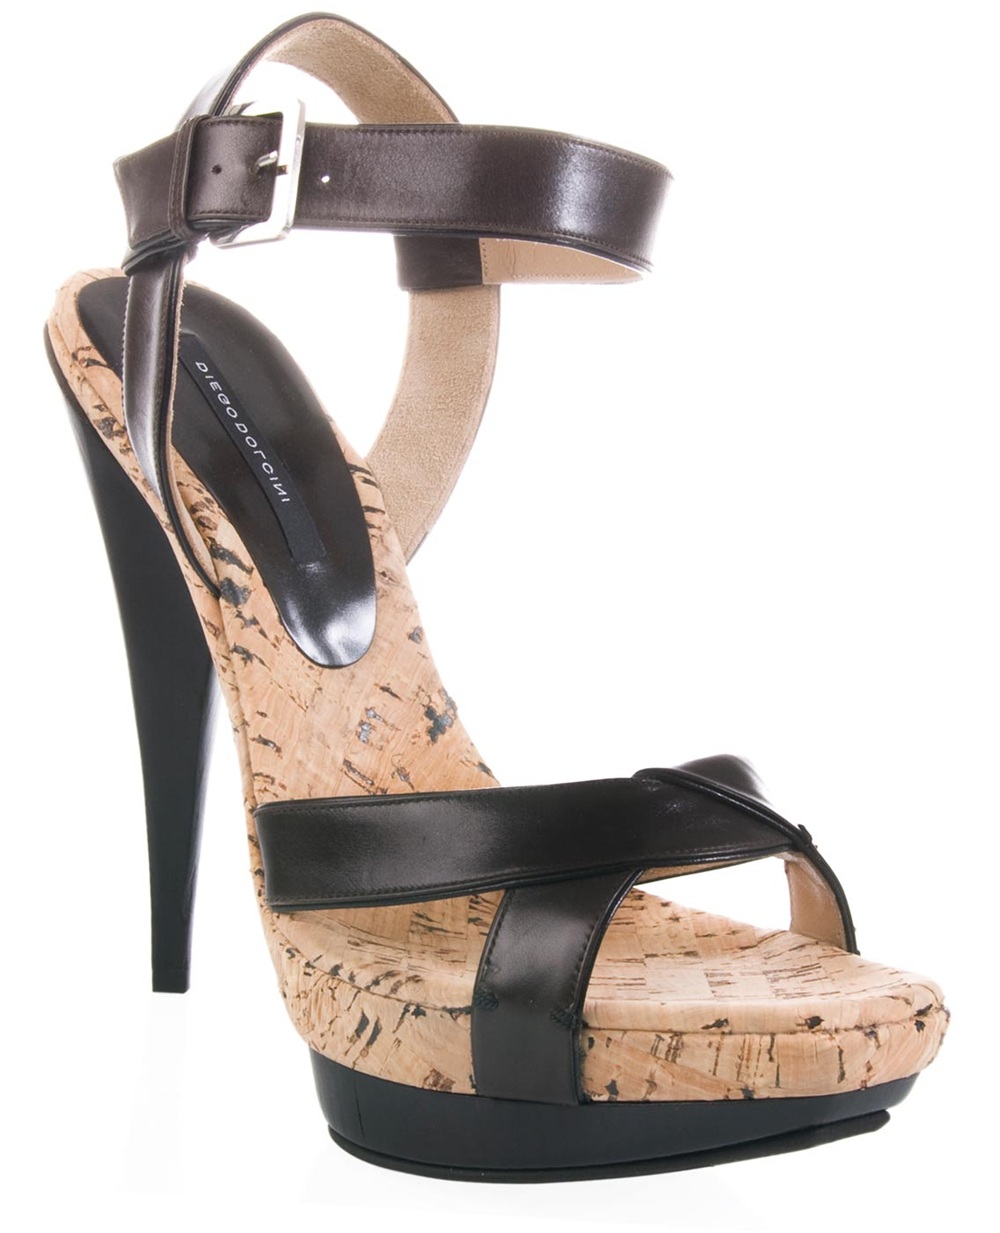 Lyst - Diego Dolcini Cork and Leather Sandal in Brown